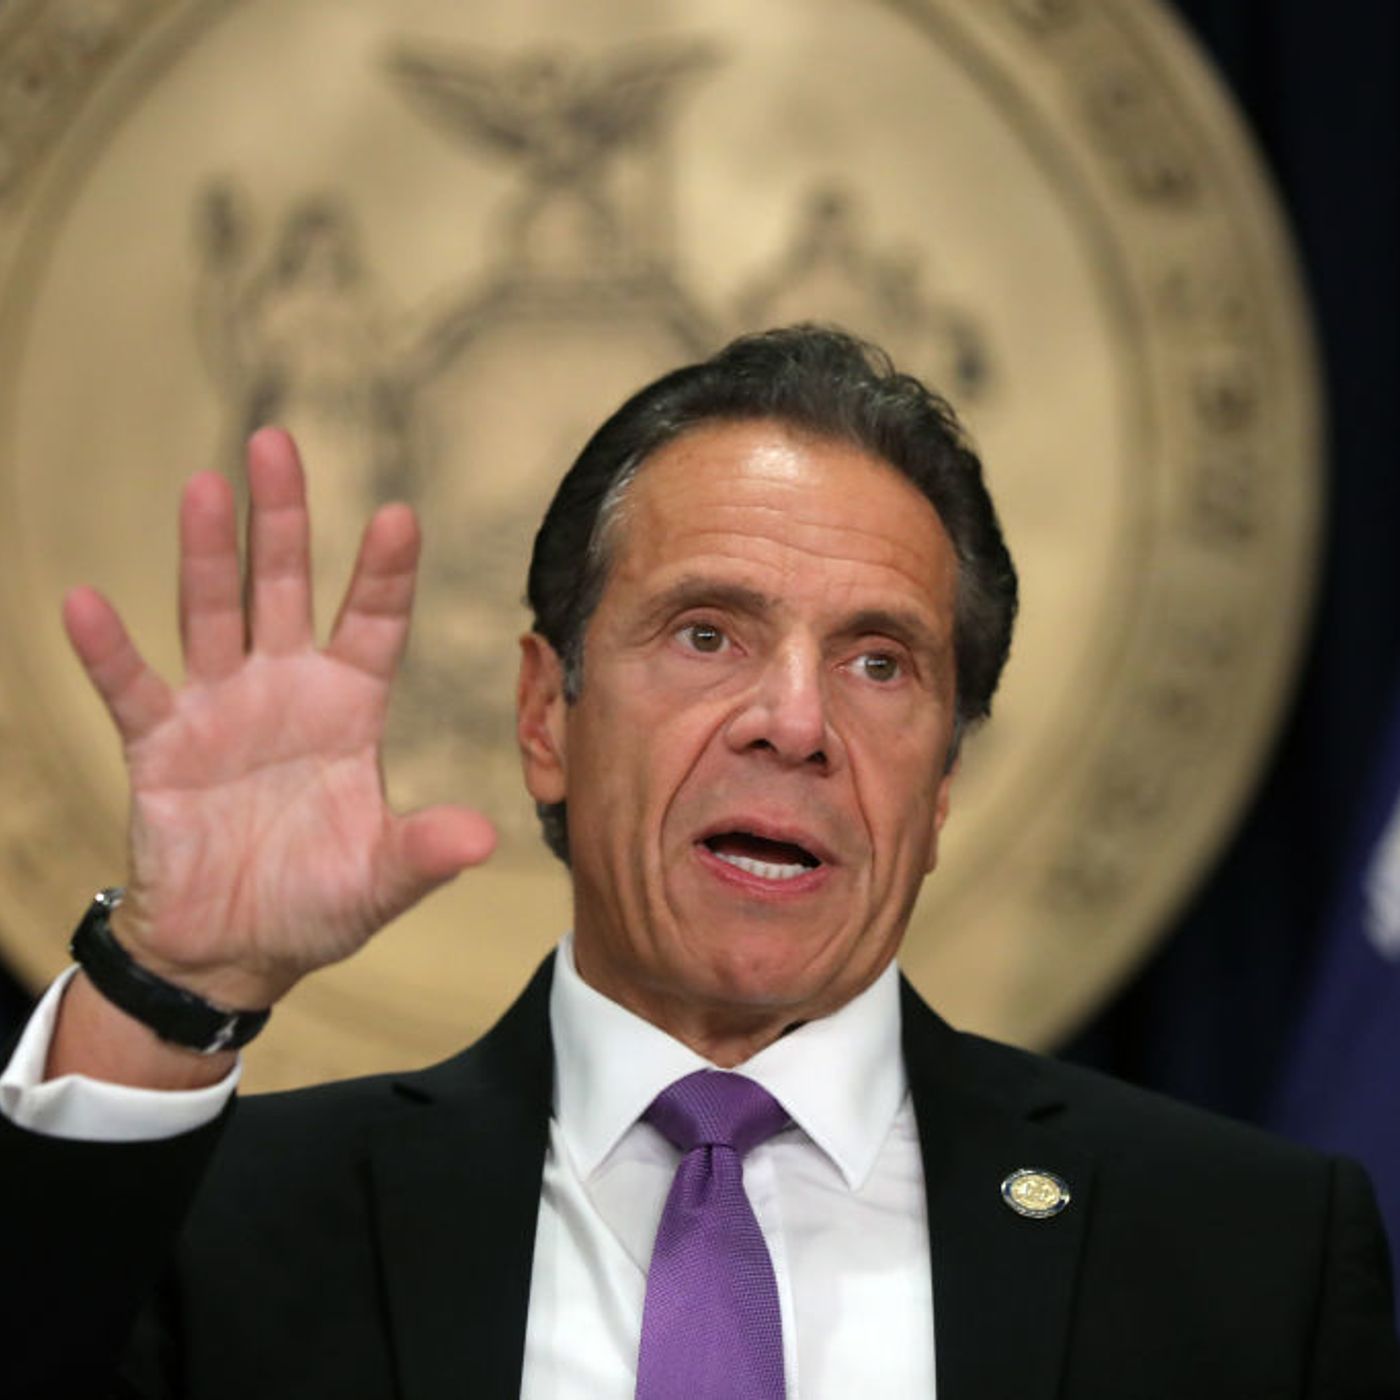 The collapse of Andrew Cuomo